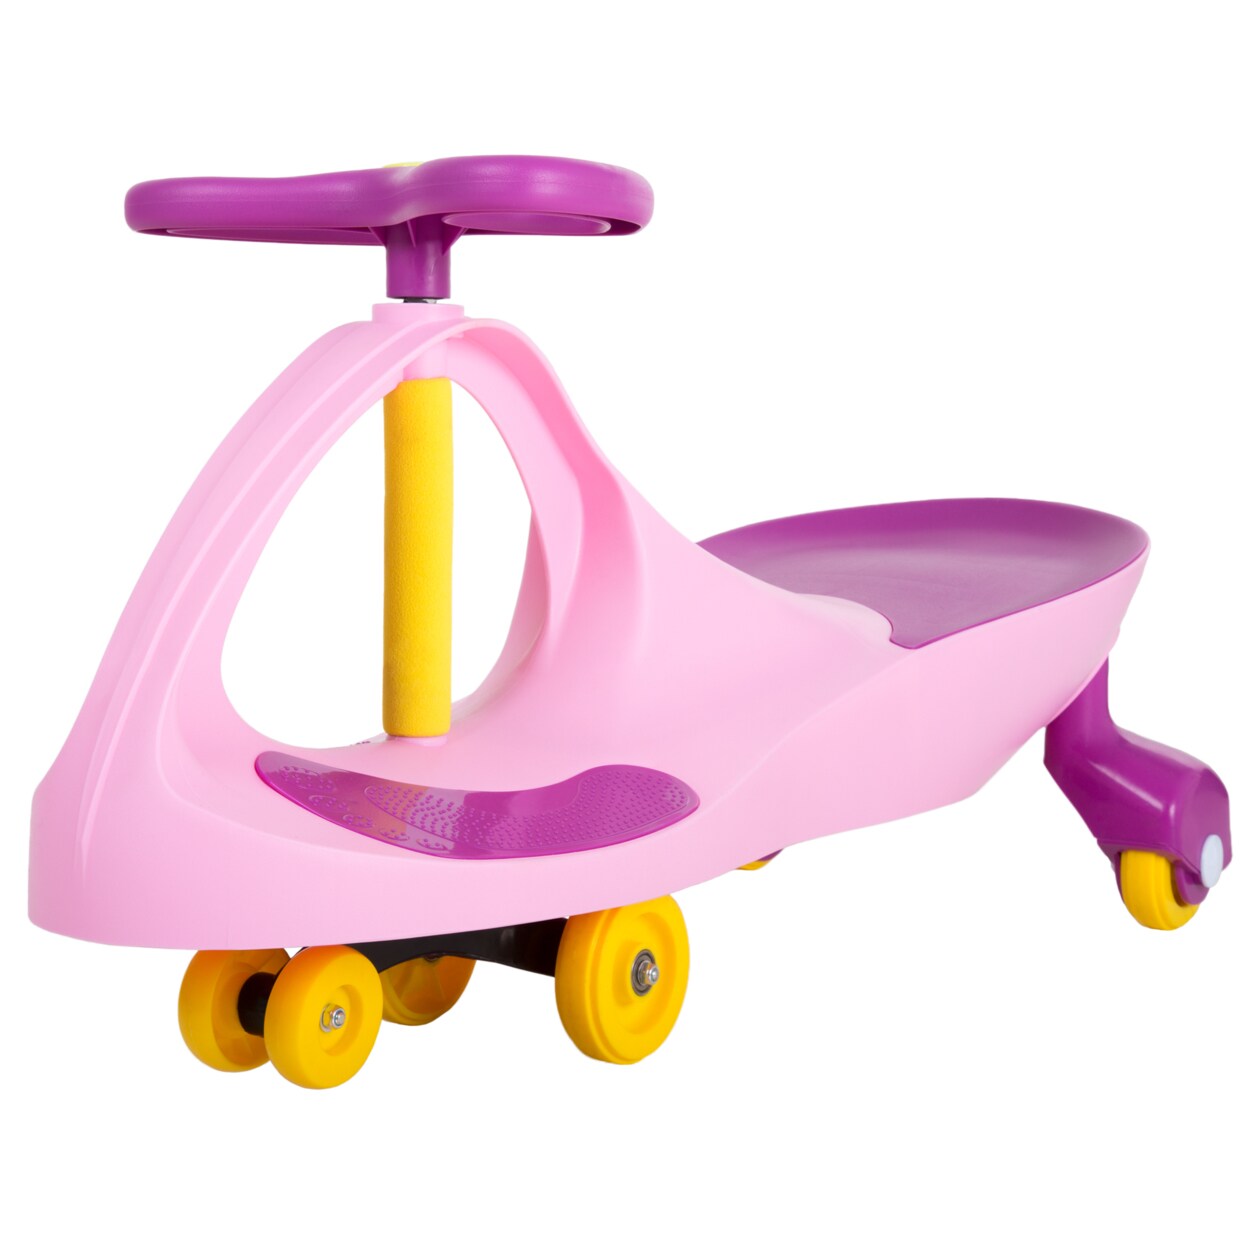 Lil Rider Lil Rider Pink Purple Wiggle Ride On Car Roller Coaster Car Energy Powered Ride On 5347